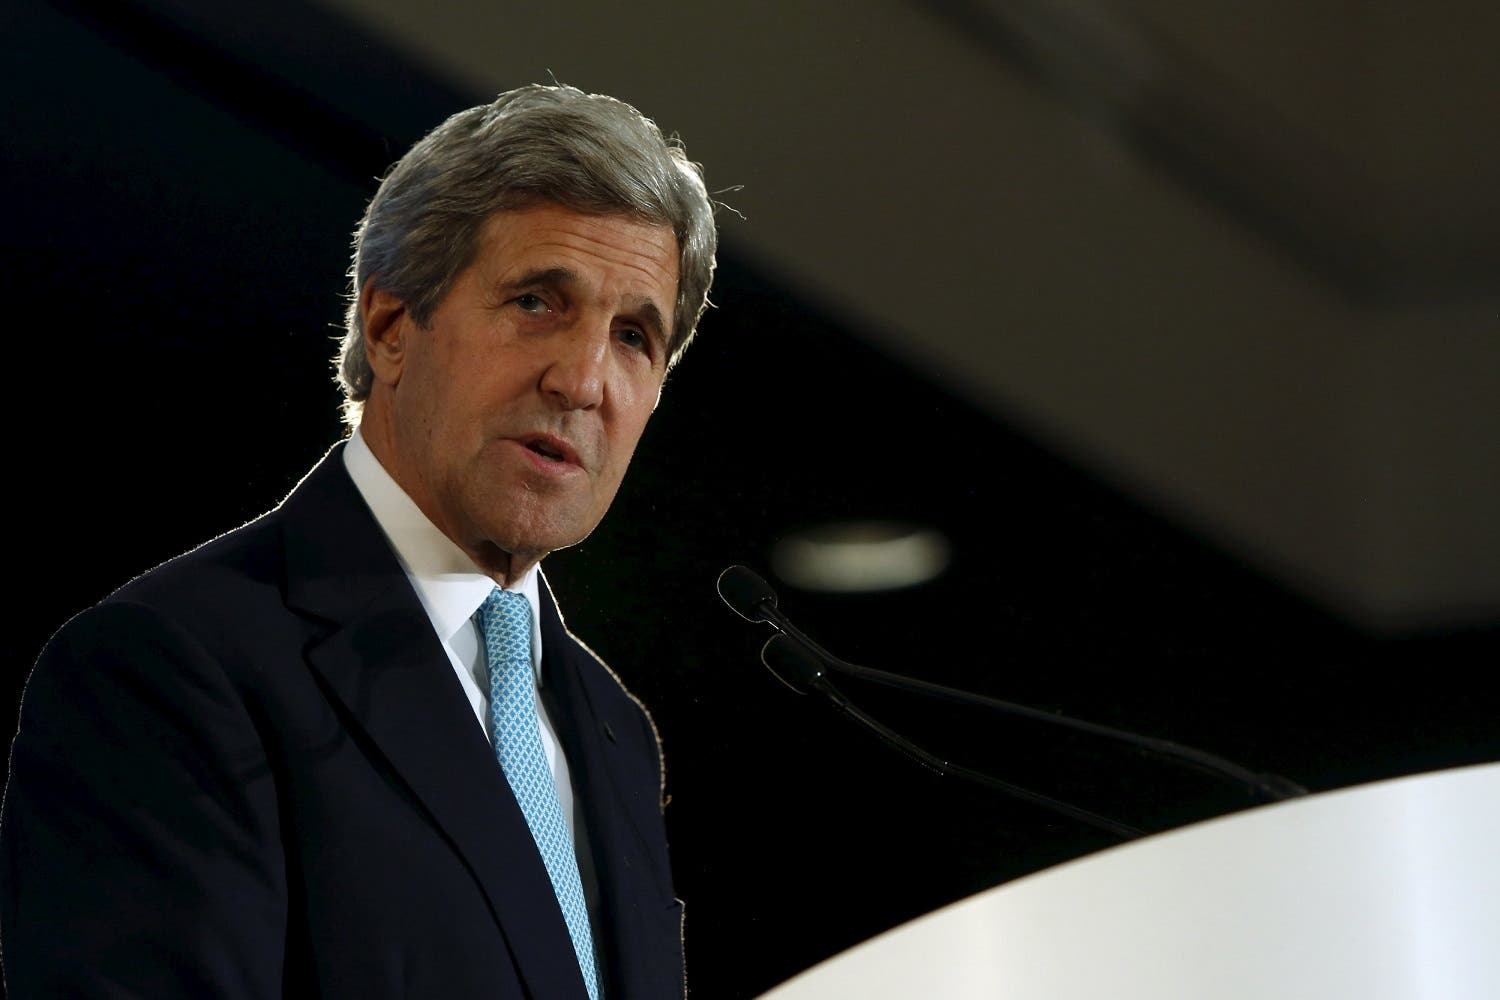 U.S. Secretary of State John Kerry delivers remarks on trade at an event with the Pacific Council on International Policy in Los Angeles, April 12, 2016. (Reuters)